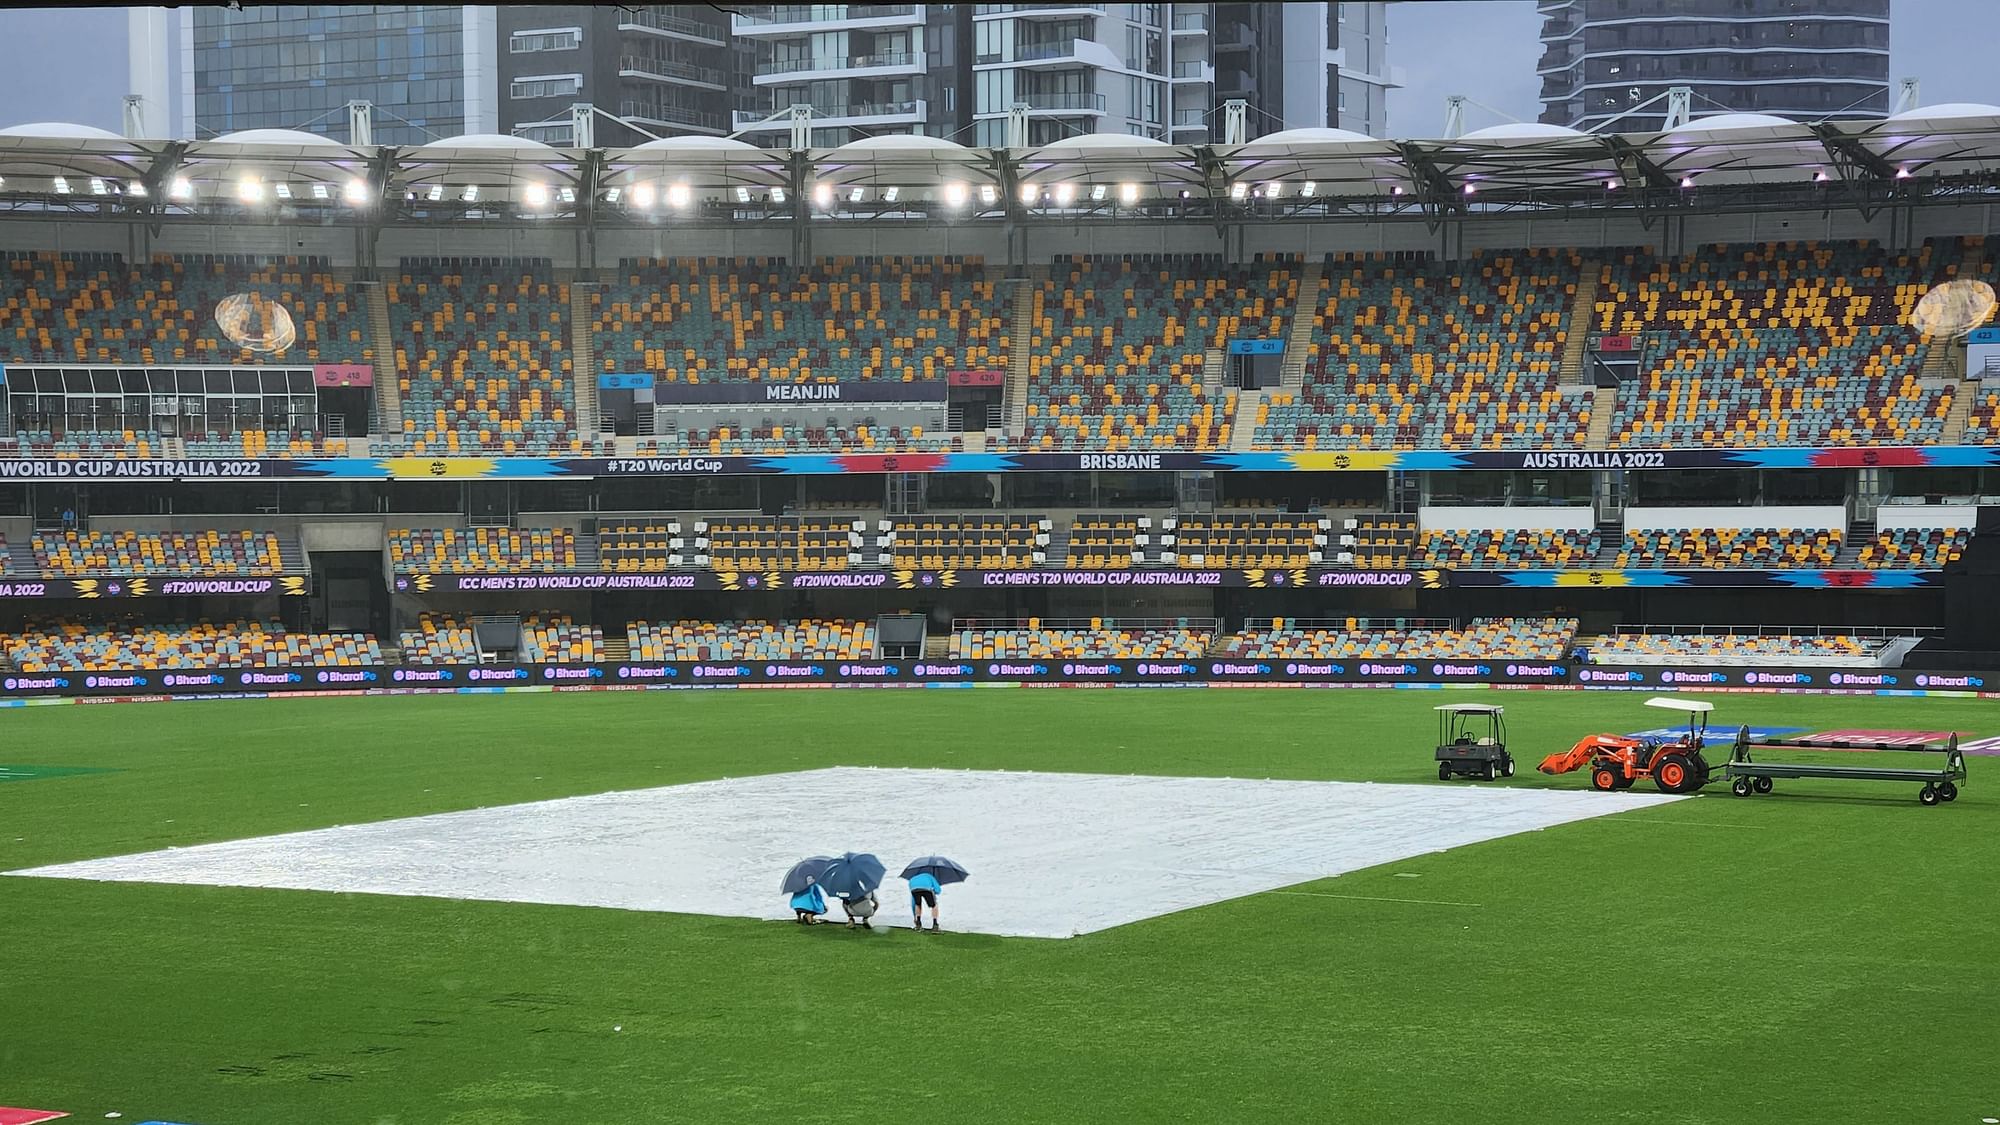 India vs Pakistan, T20 World Cup Weather Forecast Rain May Play